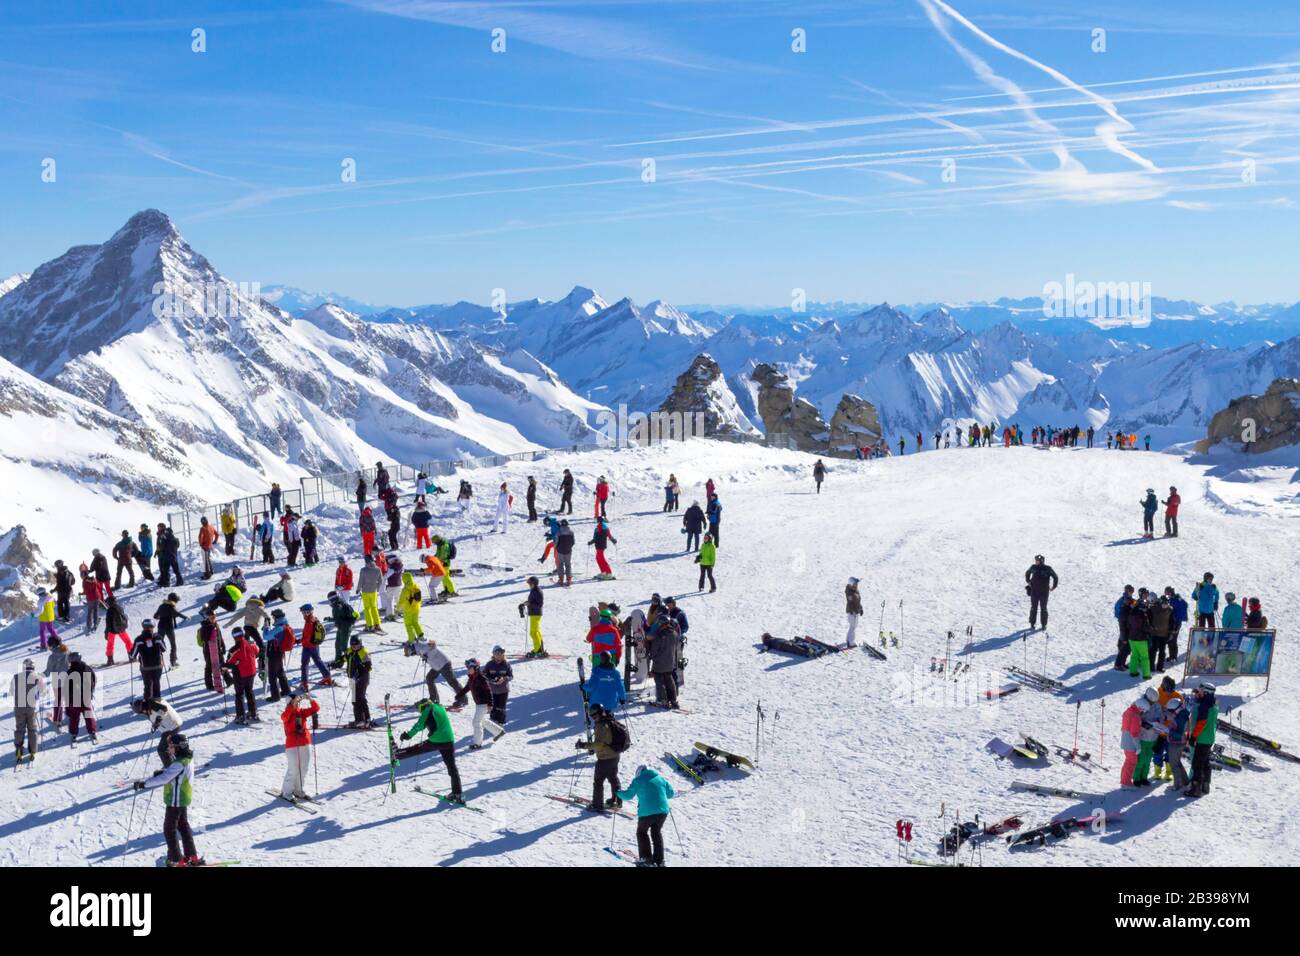 Austria Hintertux - 04 February 2019 : Many skiers and snowboarders stand on the slope before going down in the Austrian curort in Alps.Tirol. Stock Photo